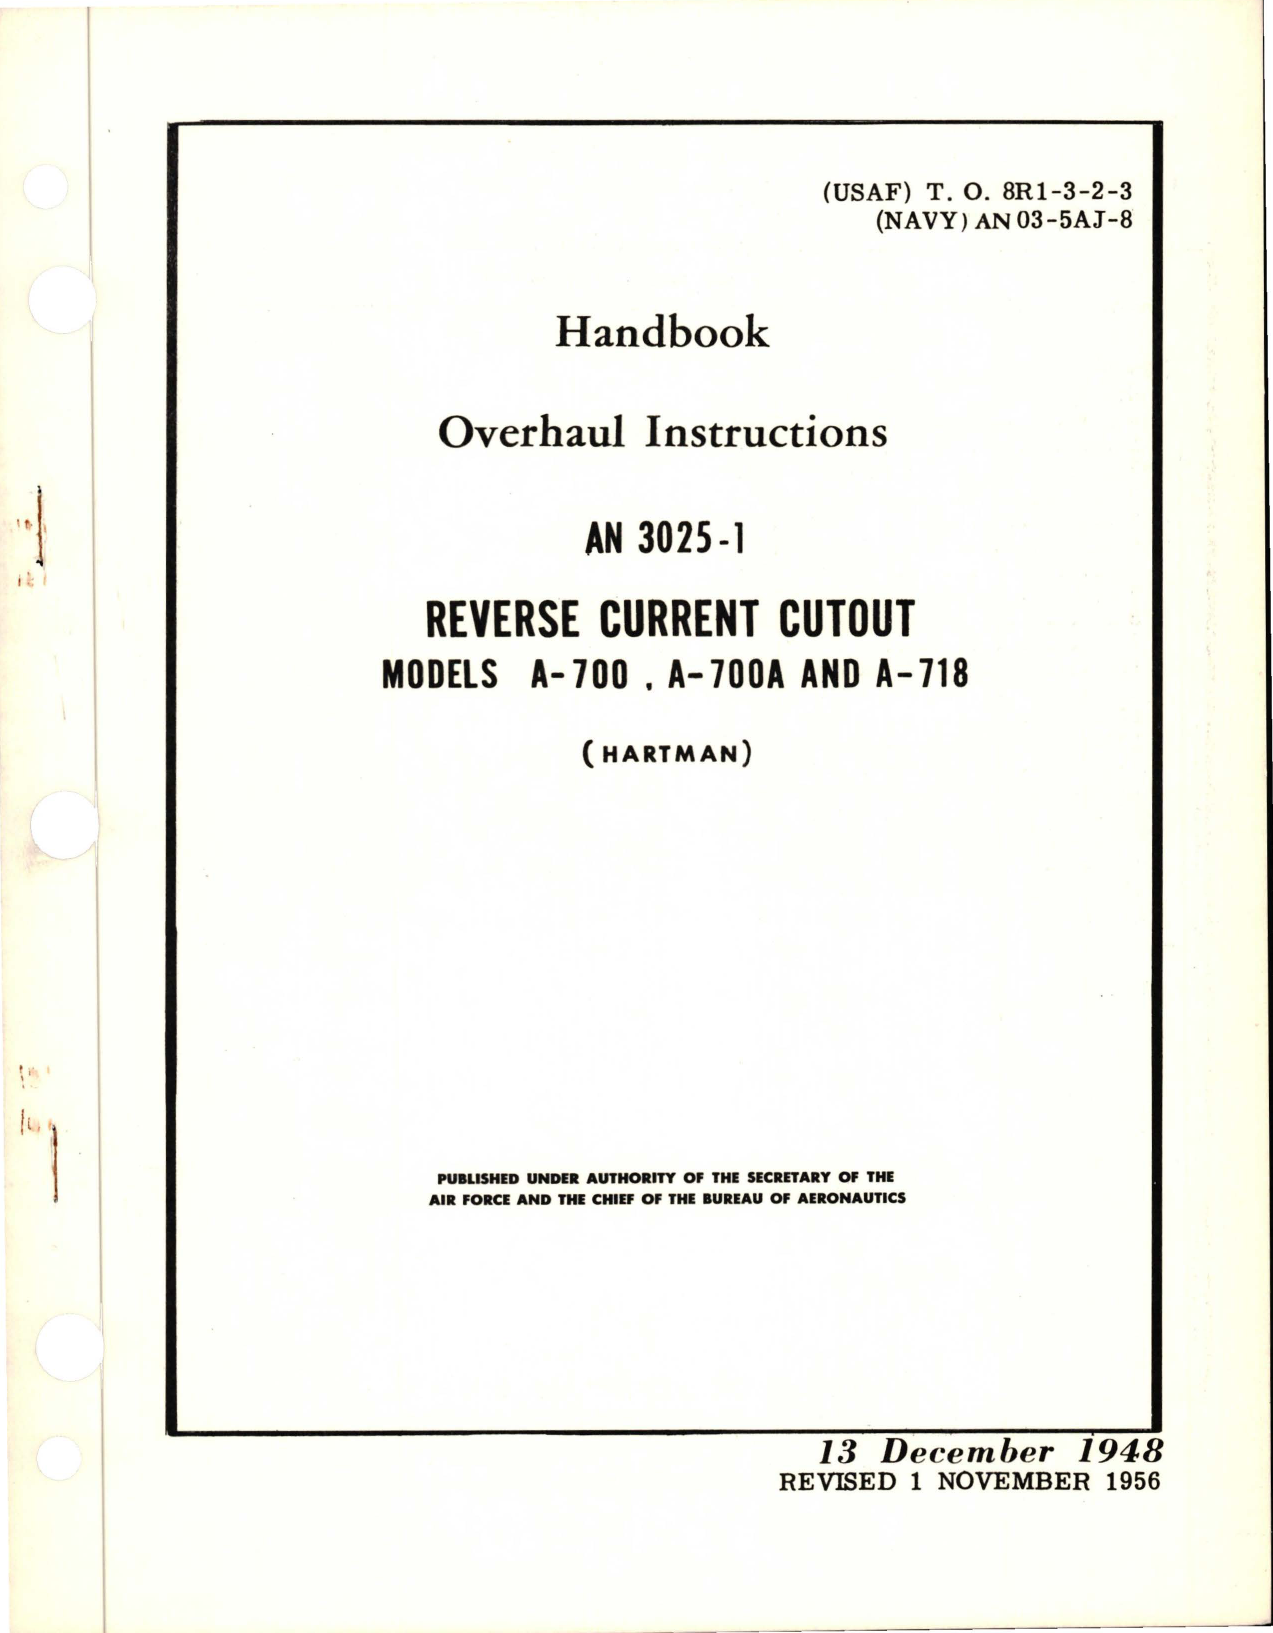 Sample page 1 from AirCorps Library document: Overhaul Instructions for Reverse Current Cutout - AN 3025-1 - Models A-700, A-700A, and A-718 